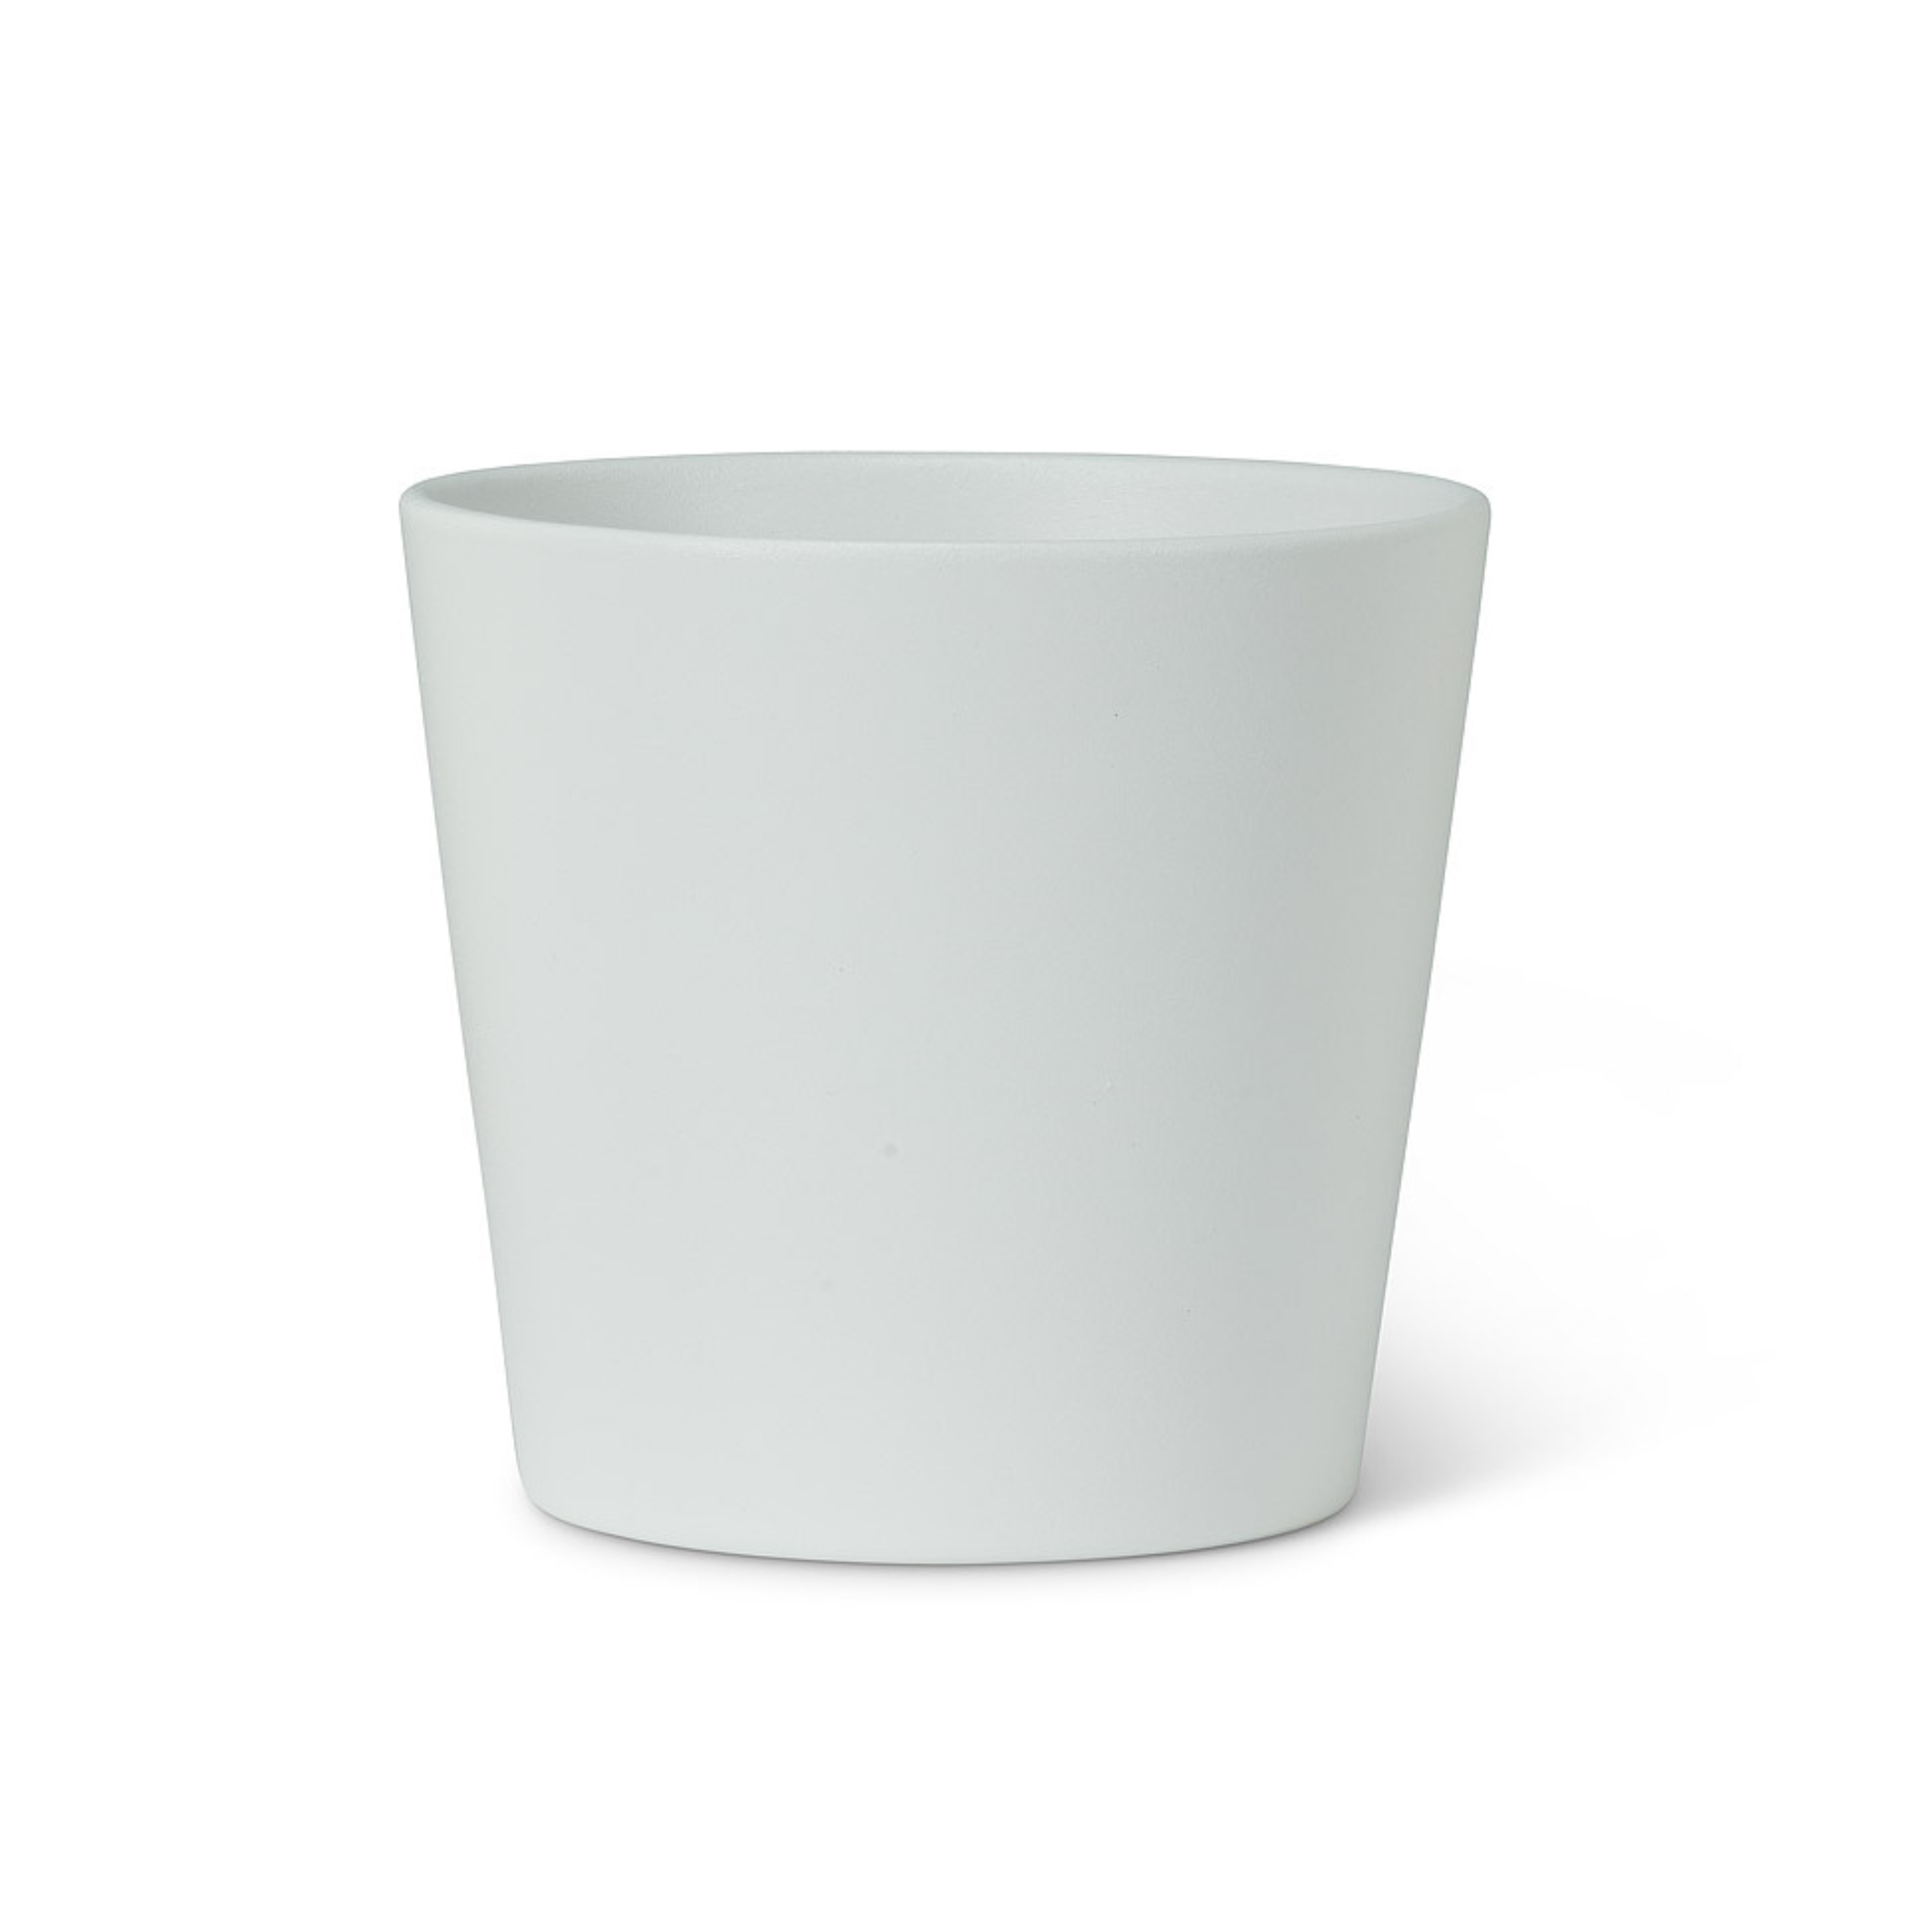 Classic Planter White Tapered